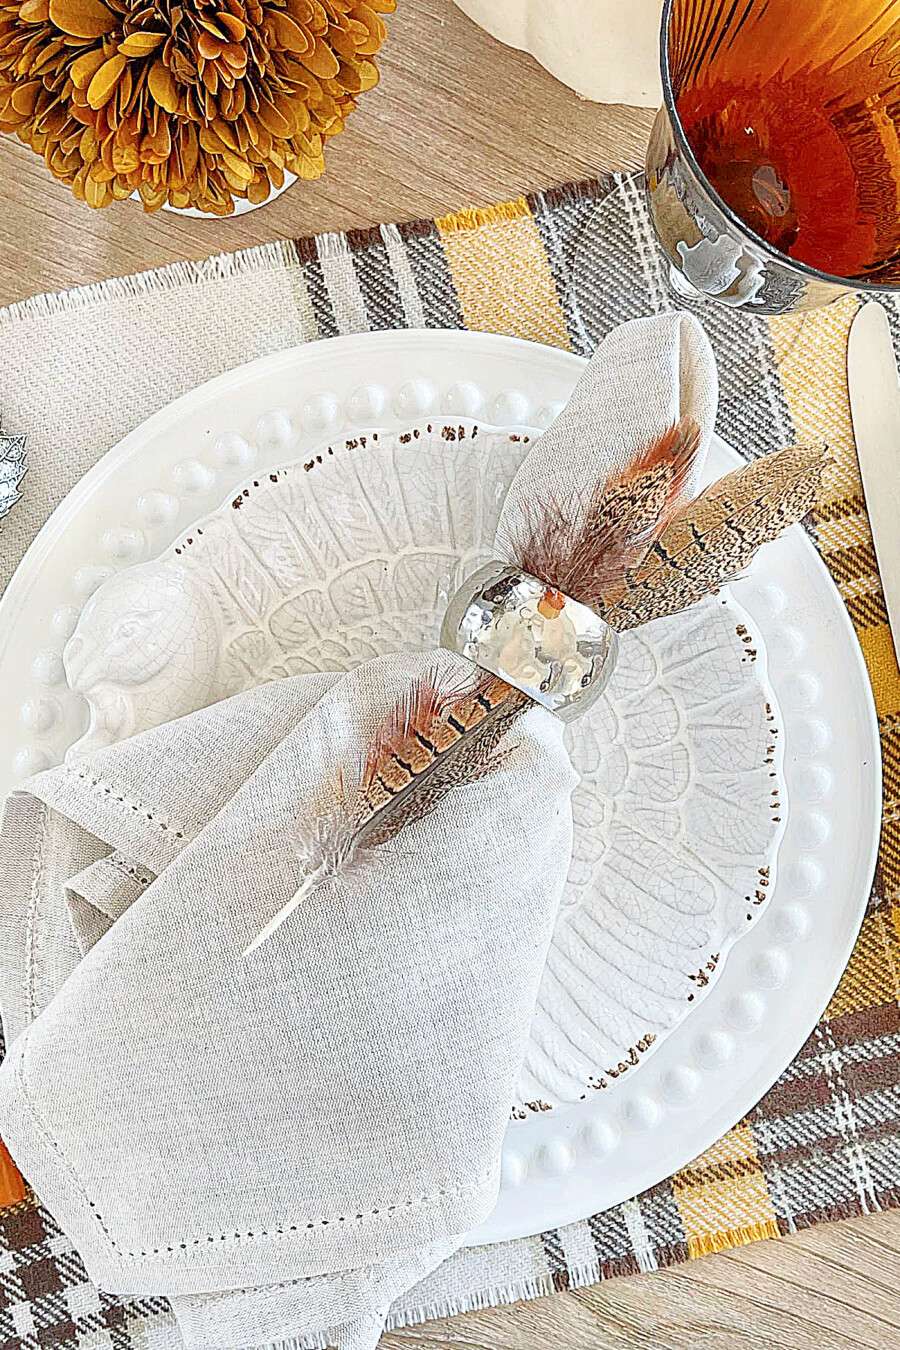 Easy To Make Thanksgiving Placemat From A Throw